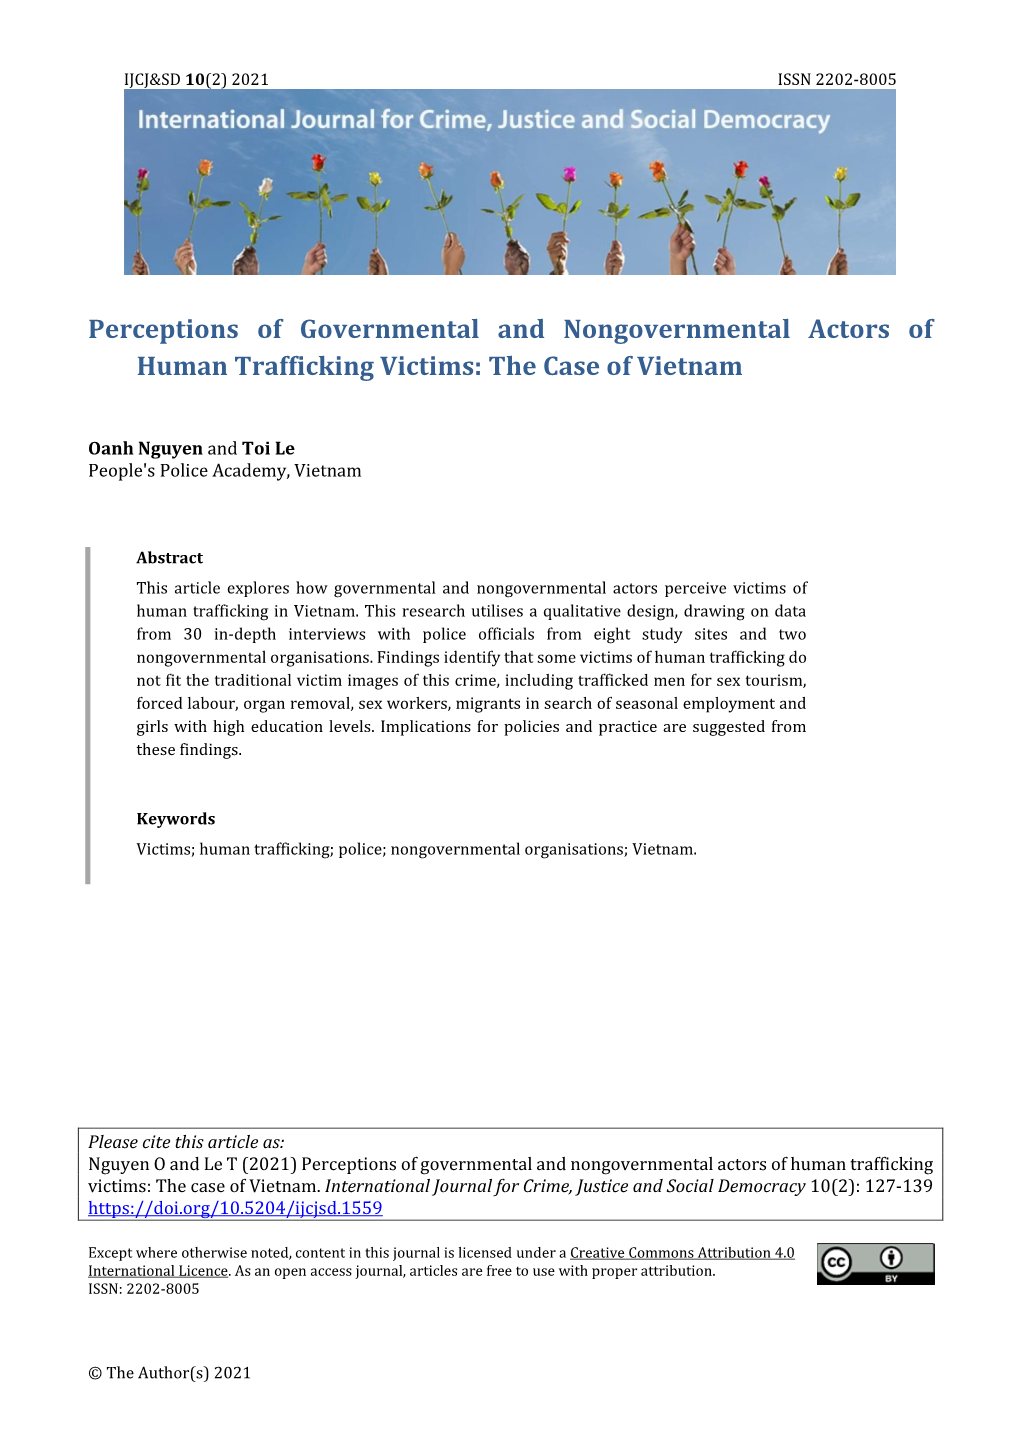 Perceptions of Governmental and Nongovernmental Actors of Human Trafficking Victims: the Case of Vietnam